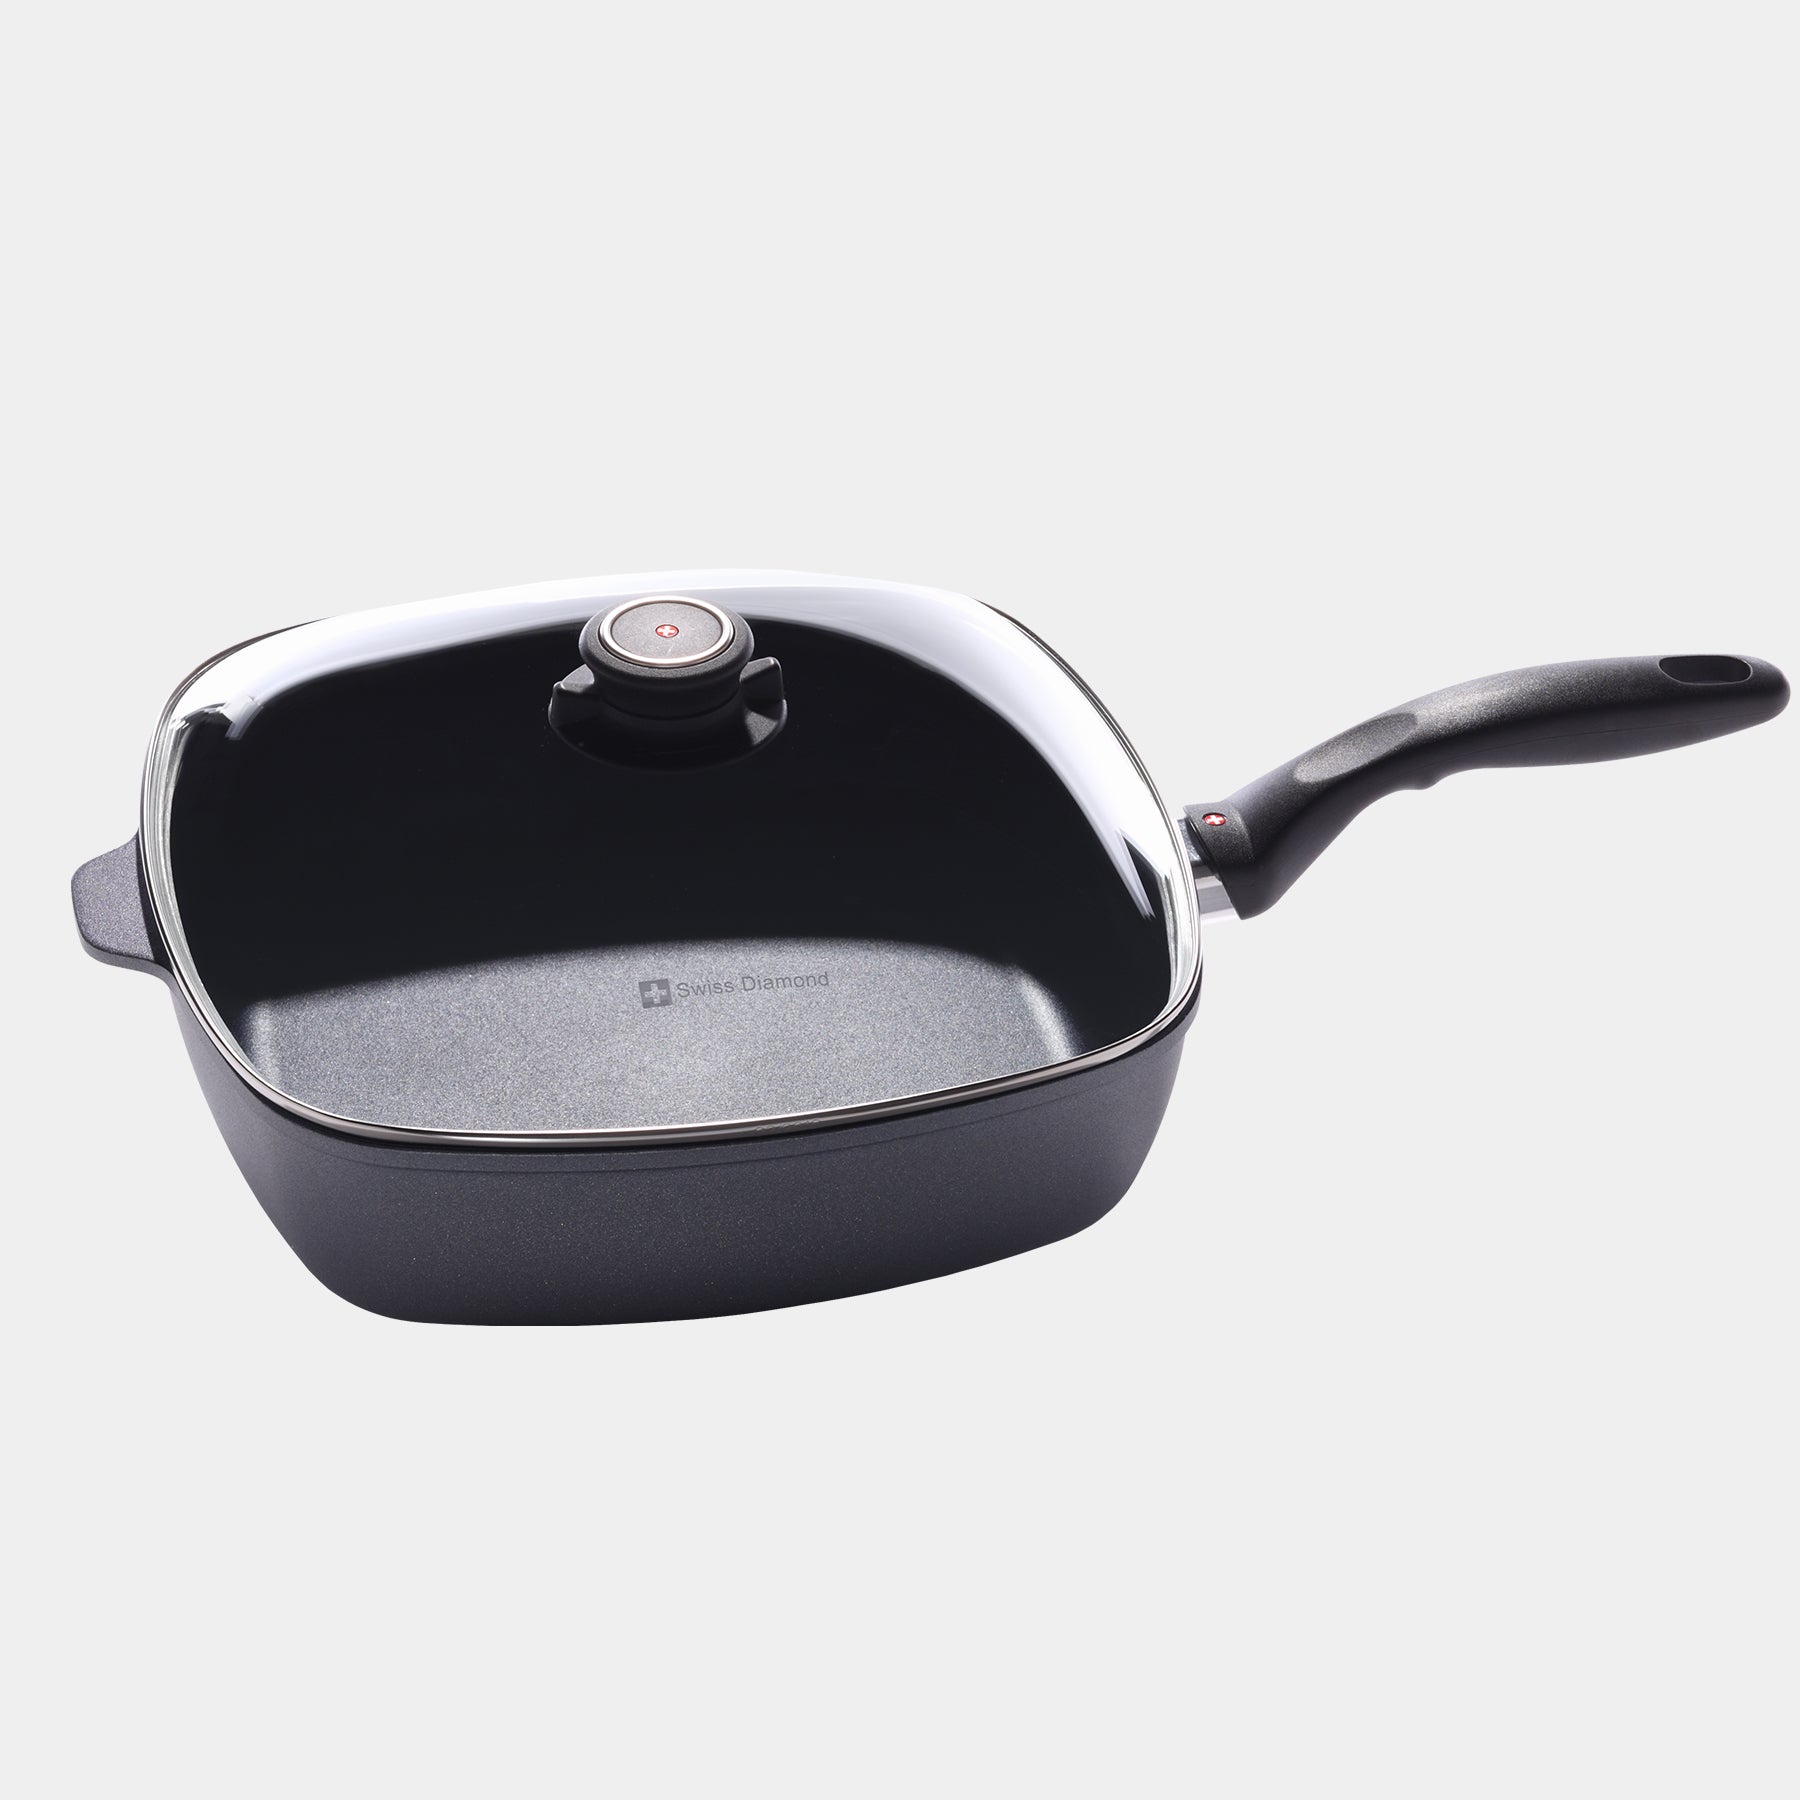 HD Nonstick 11" x 11" Square Saute Pan with Glass Lid